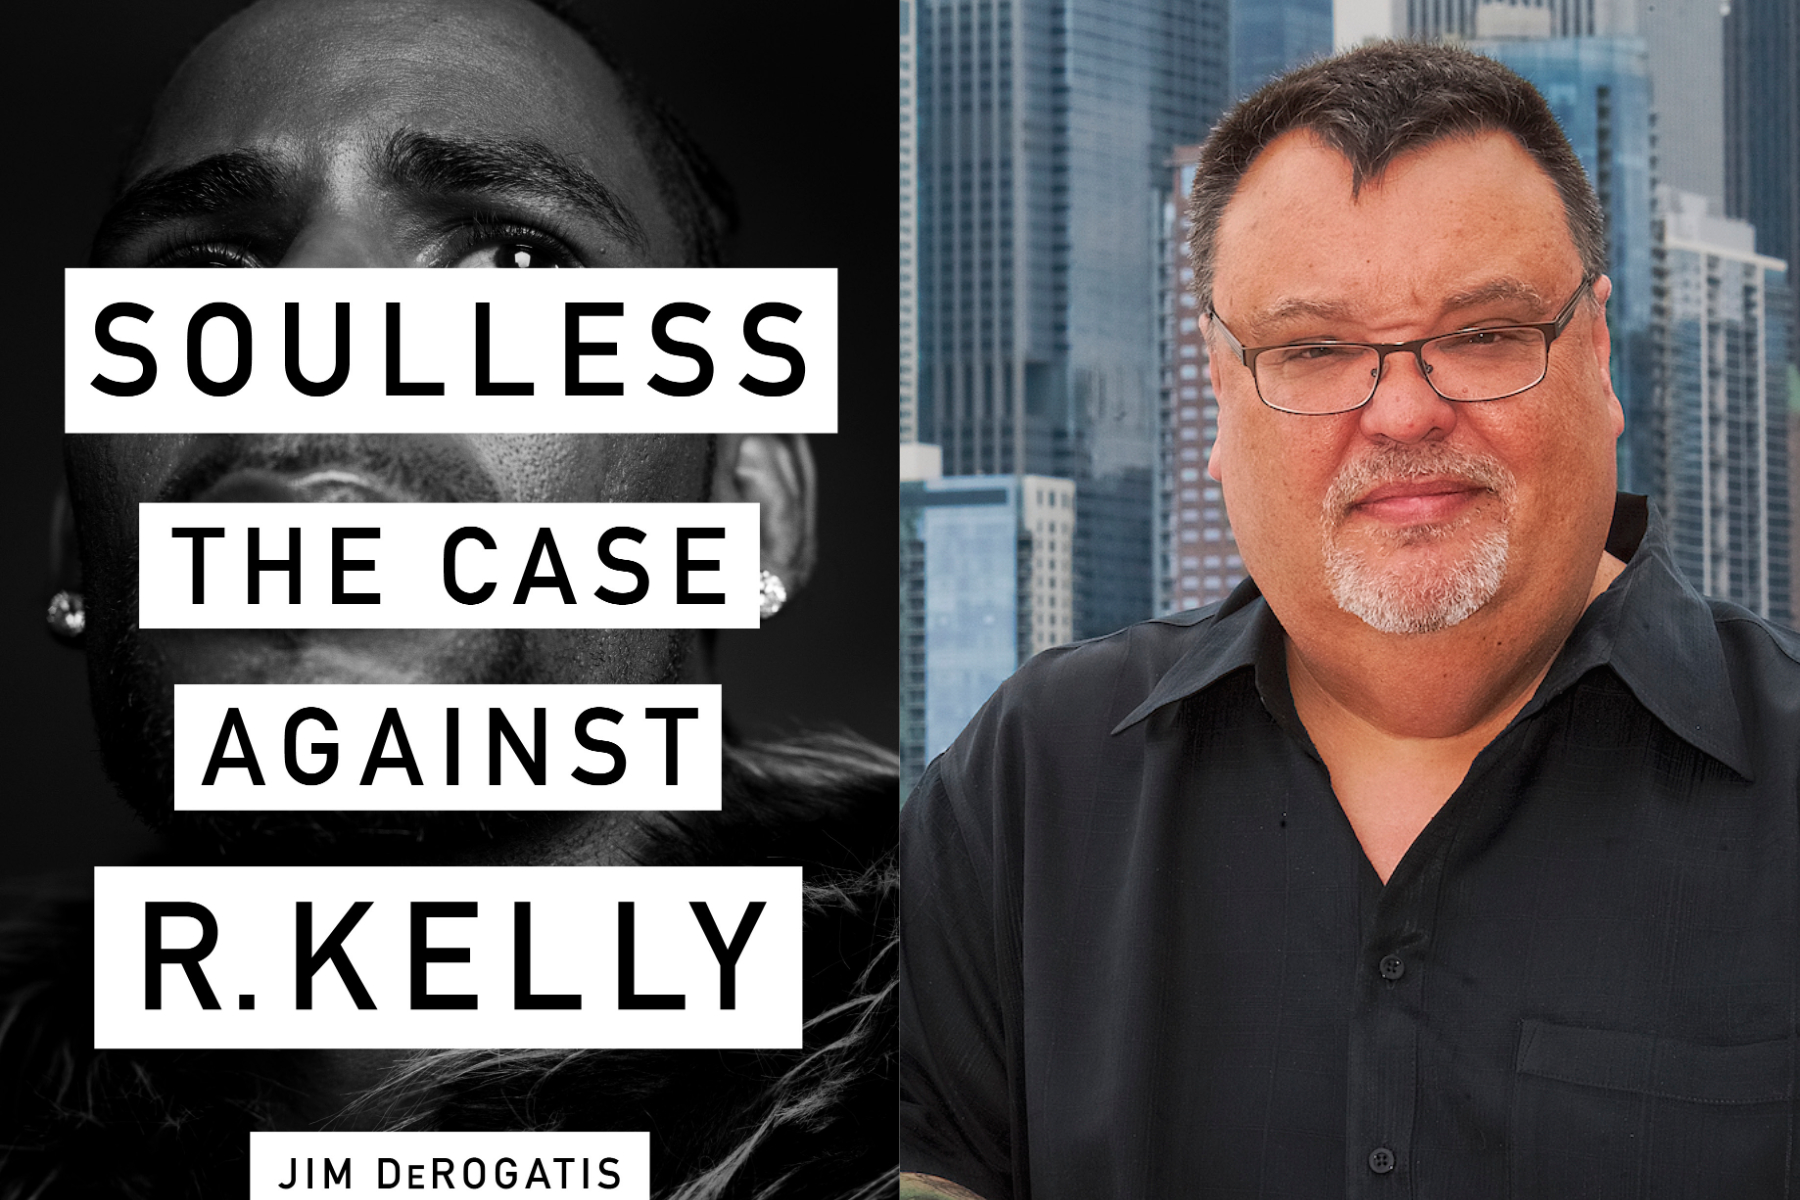 Left, the cover of Soulless: The Case against R. Kelly. Right, Jim DeRogatis.